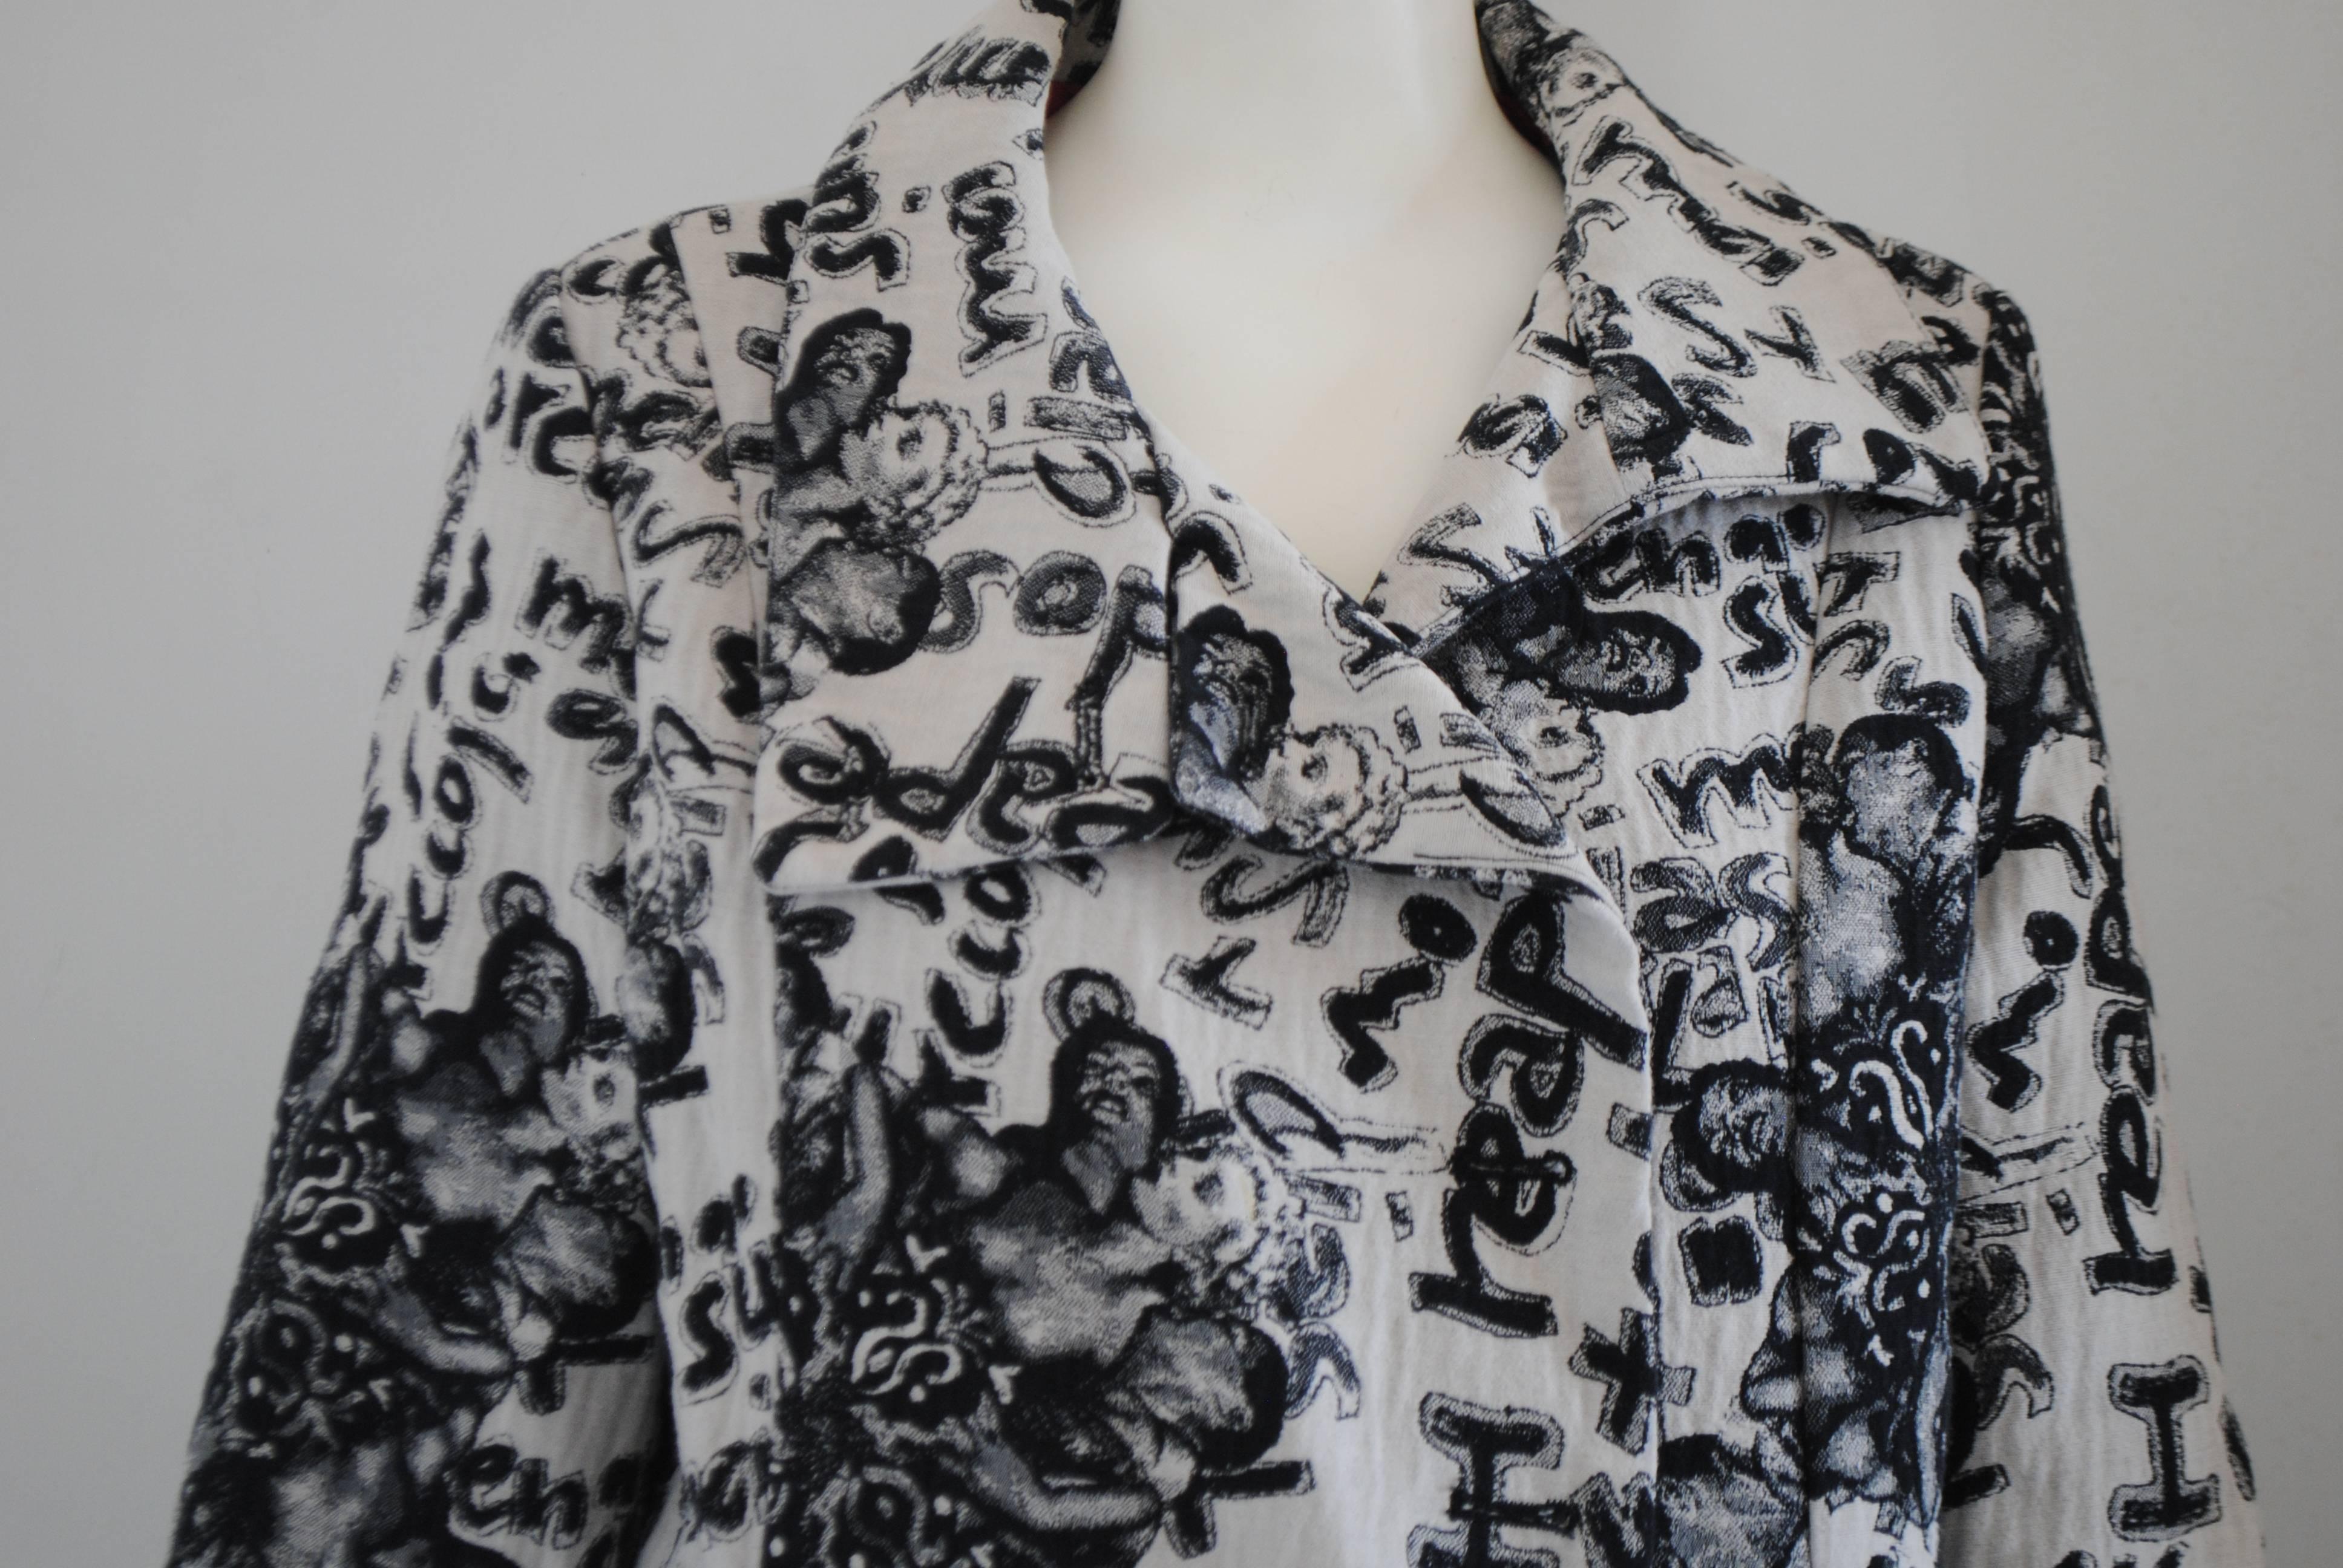 Desigual Black White Cotton Coat

Totally made in italy in size M 